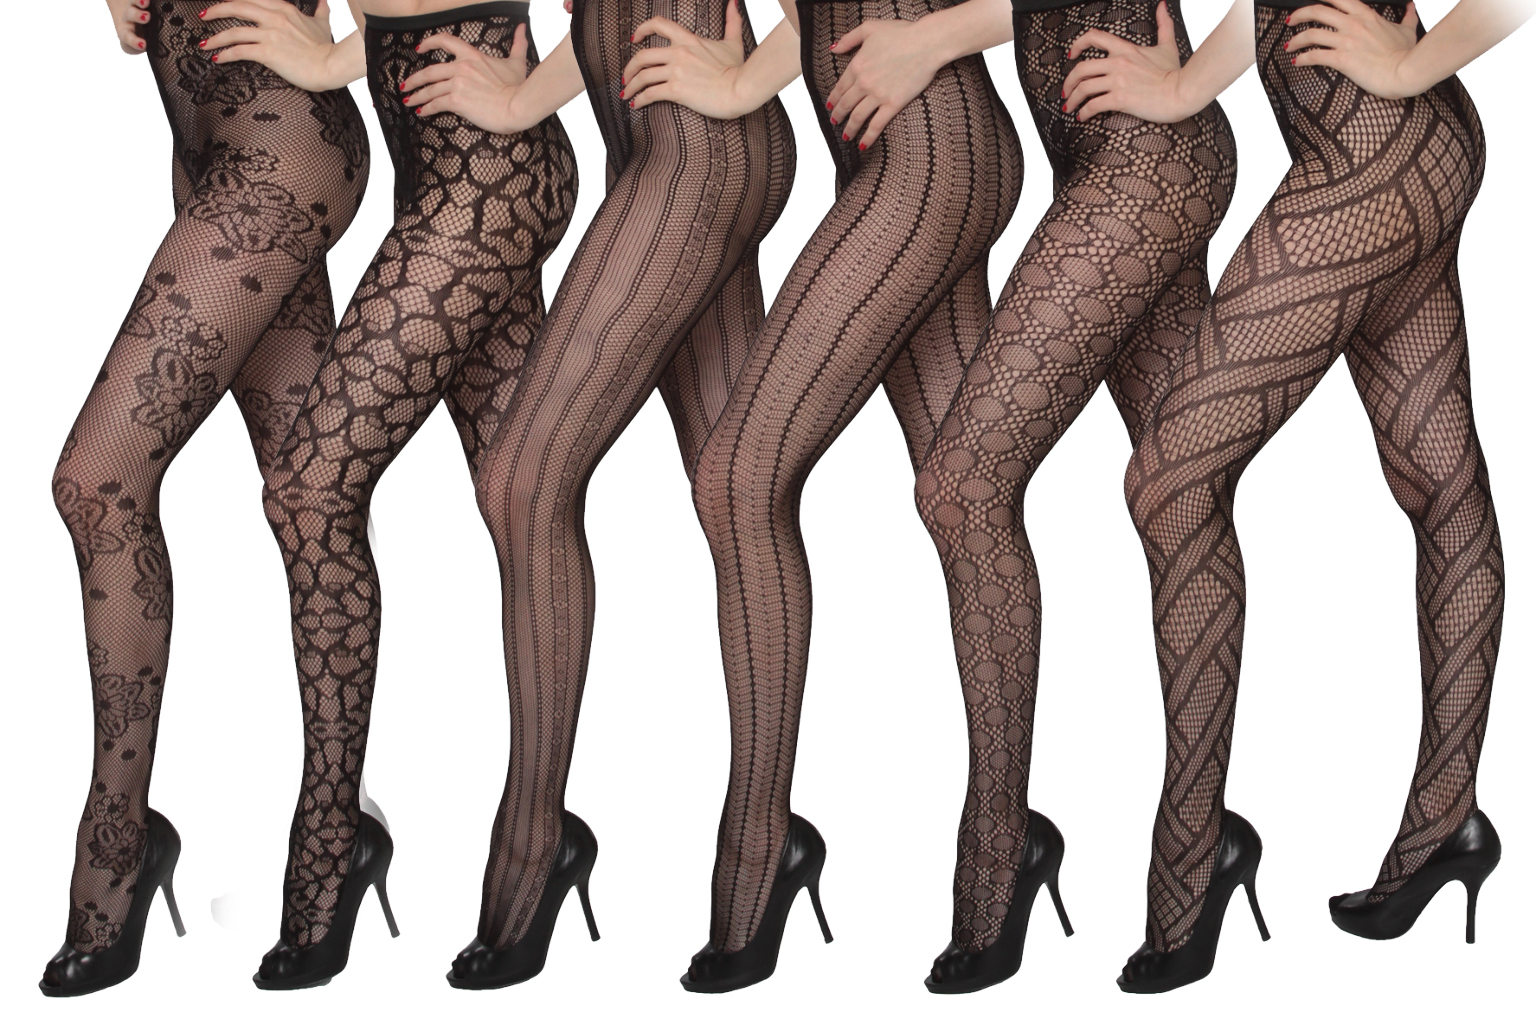 Fishnet pantyhose outfits